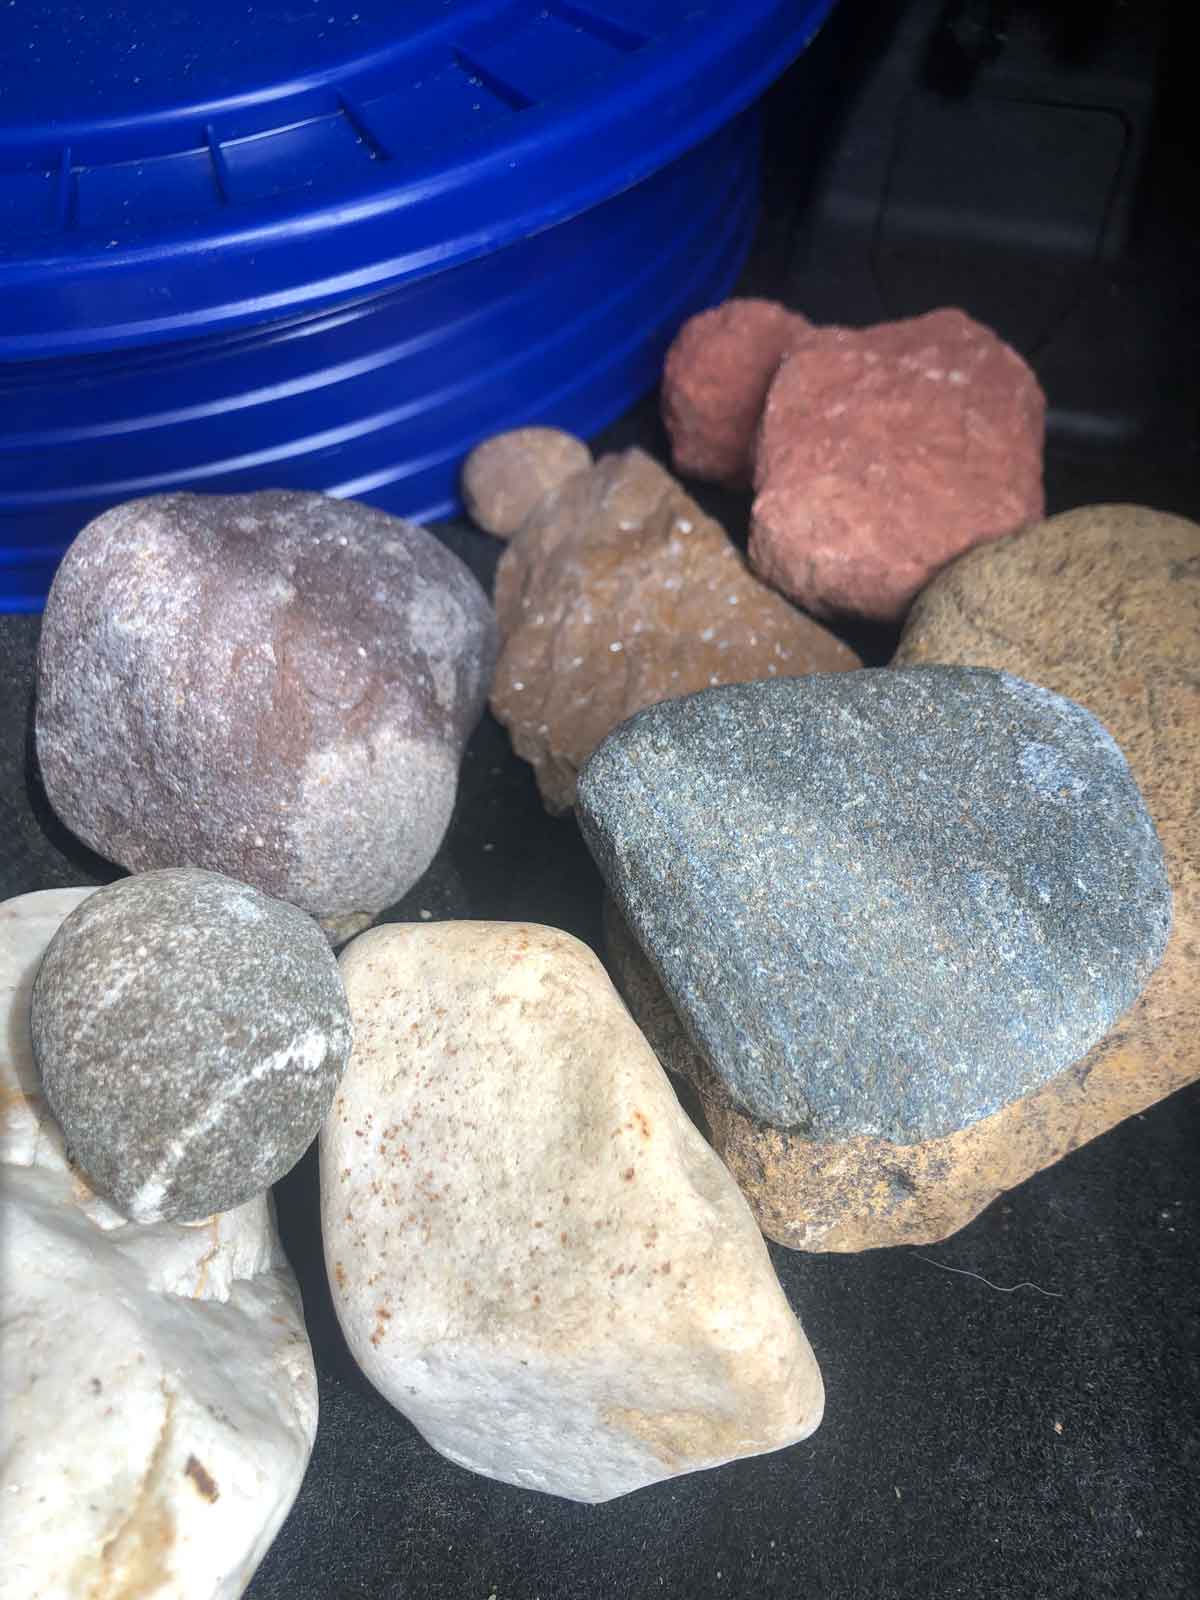 The rocks I hope to use for making another limited palette of paints.